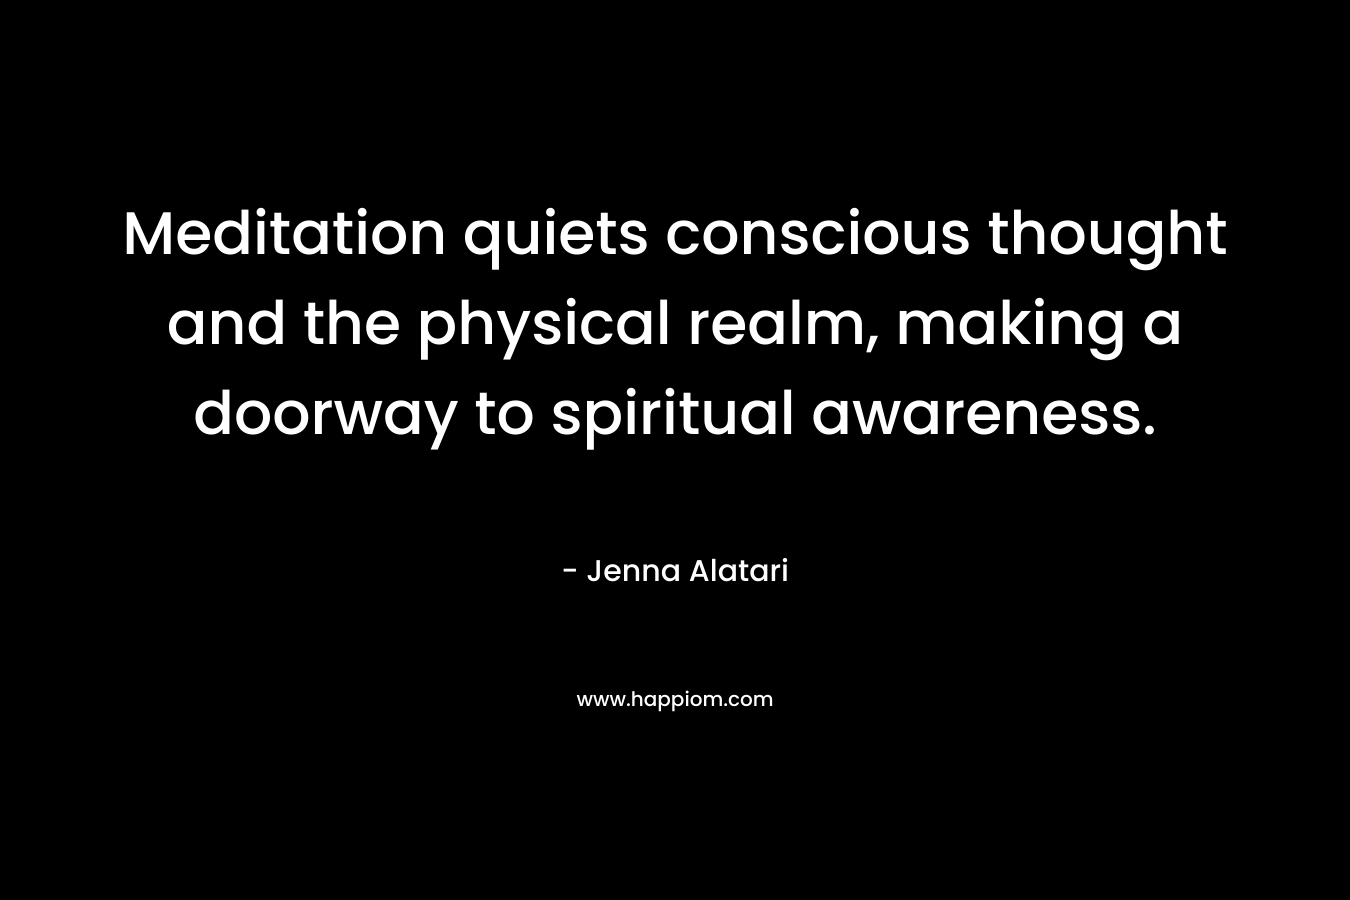 Meditation quiets conscious thought and the physical realm, making a doorway to spiritual awareness.